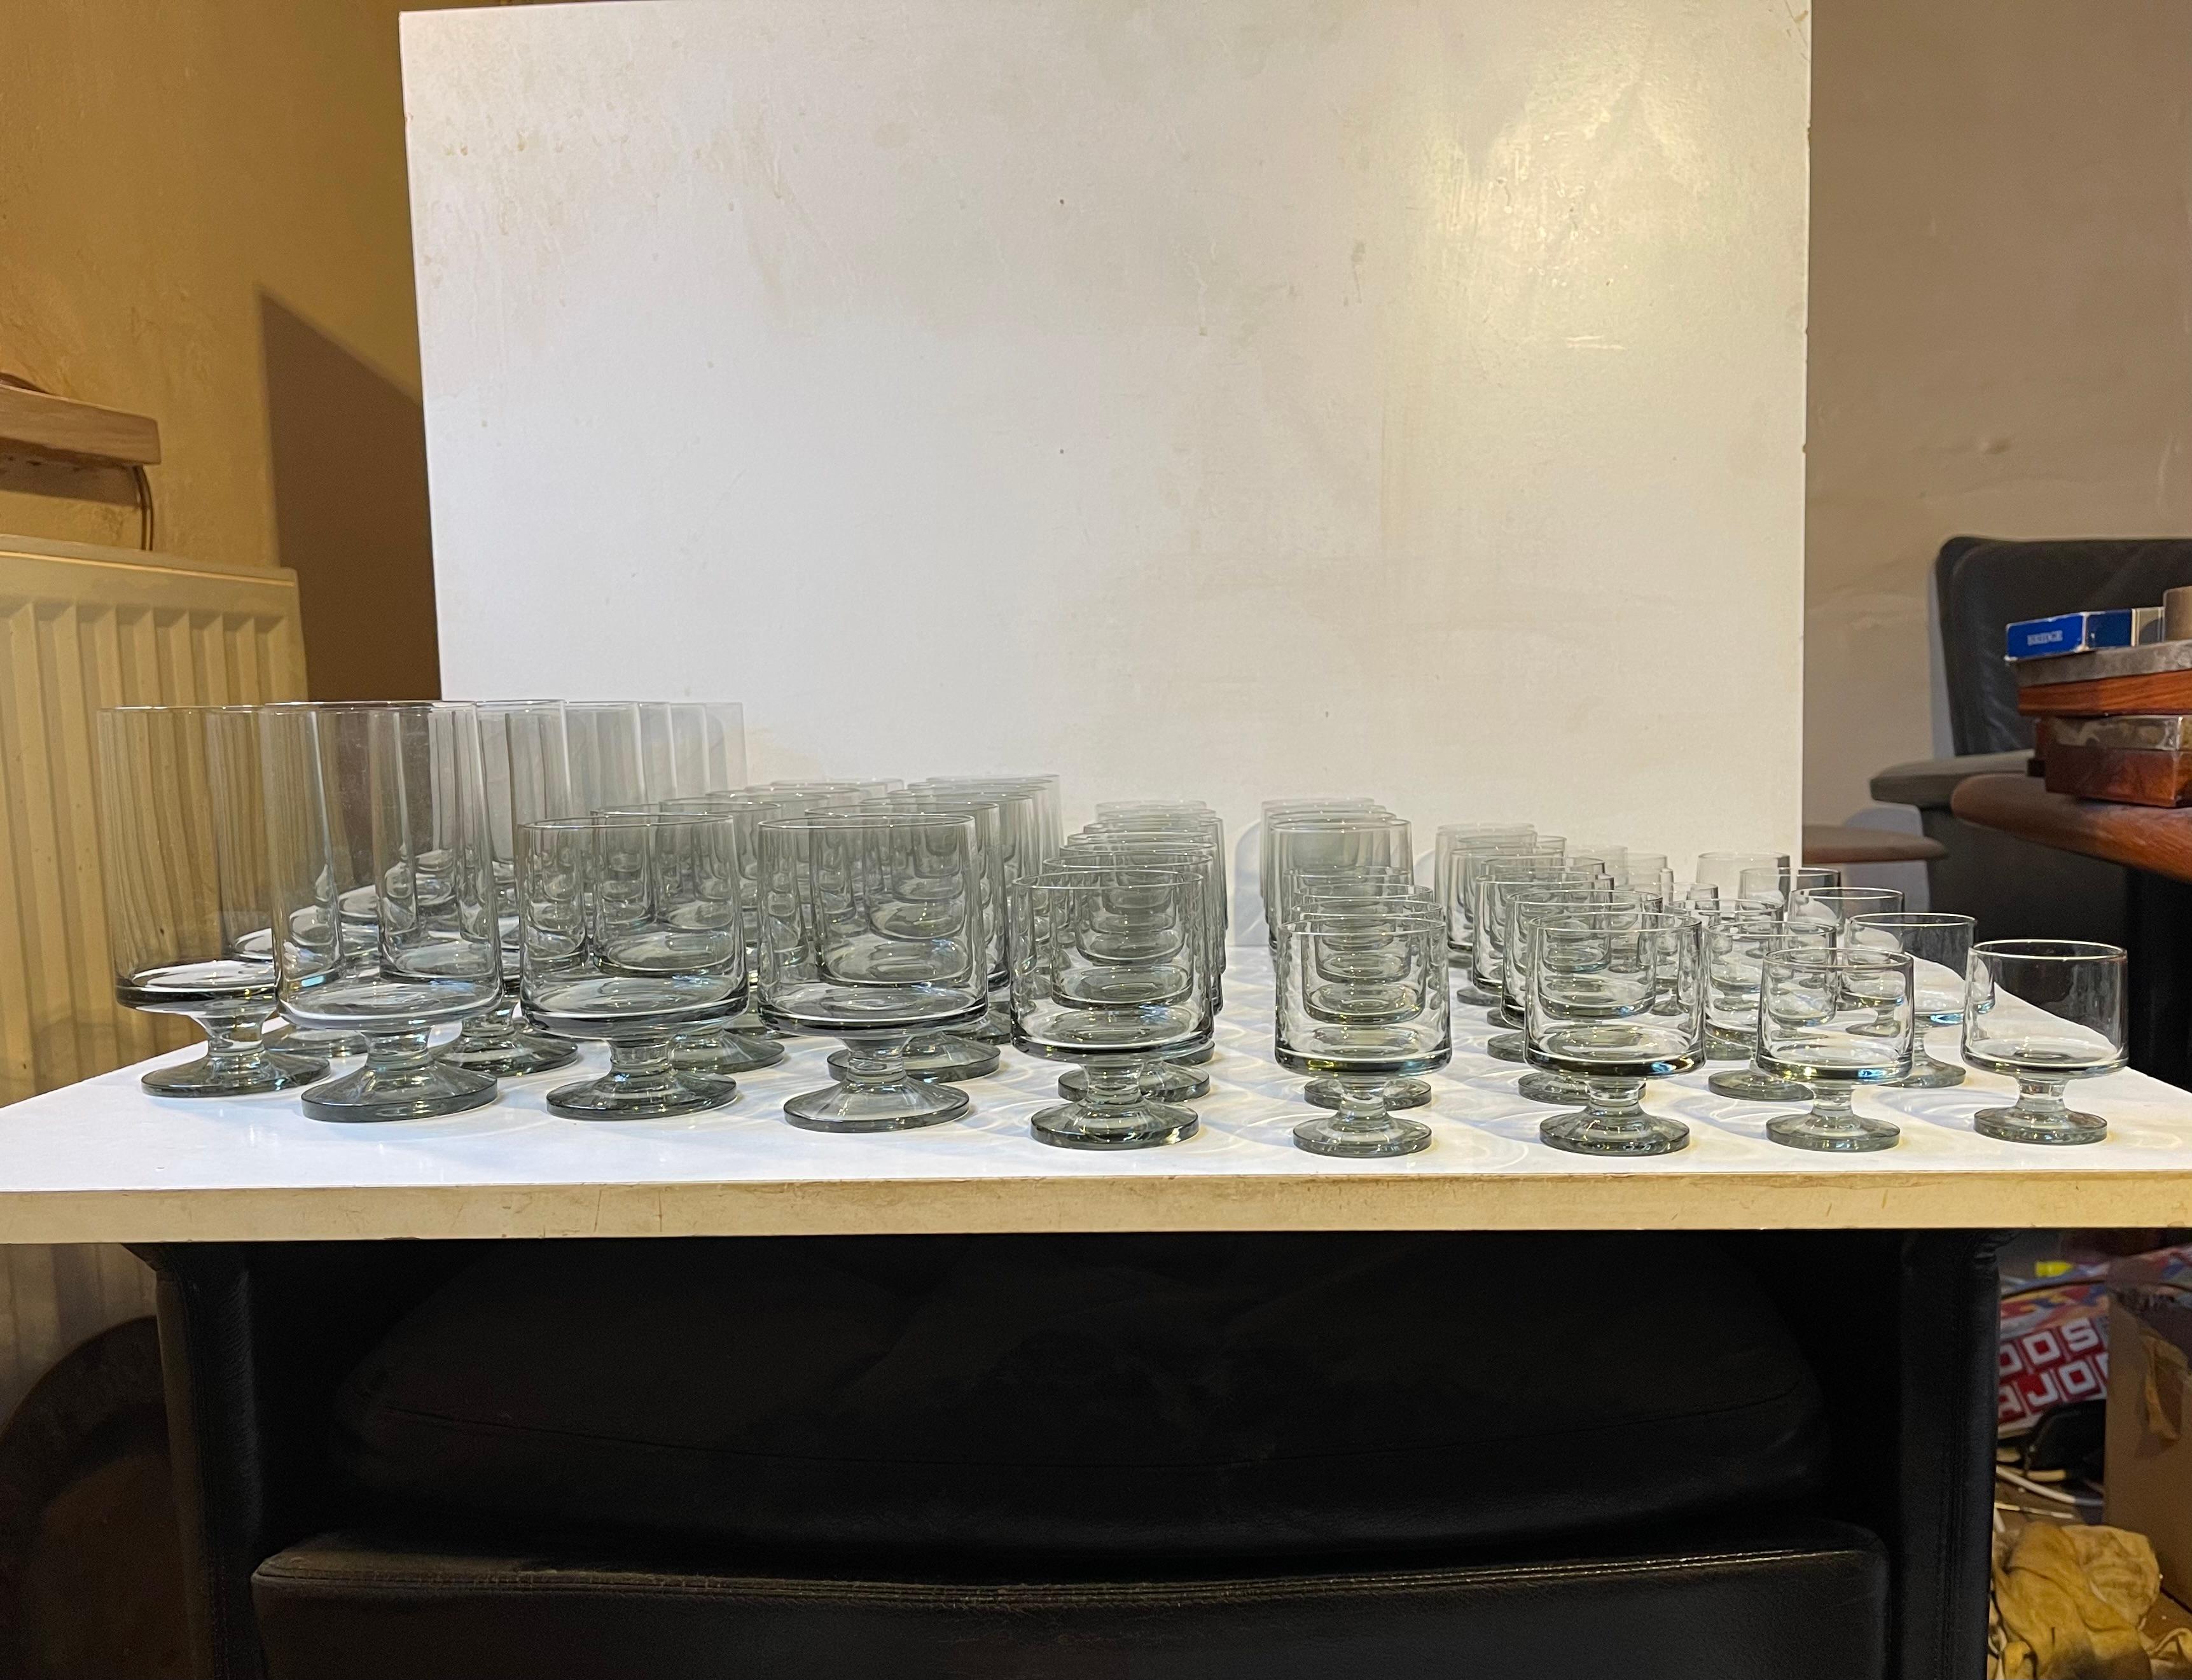 Extensive set of barely used and NOS drinking glasses in a distinct smoke grey tone. Designed in 1958 by the female designer duo Grethe Meyer and Ibi Trier Mørch. Most of the pieces particular the larger ones are hand-signed underneath the bases.